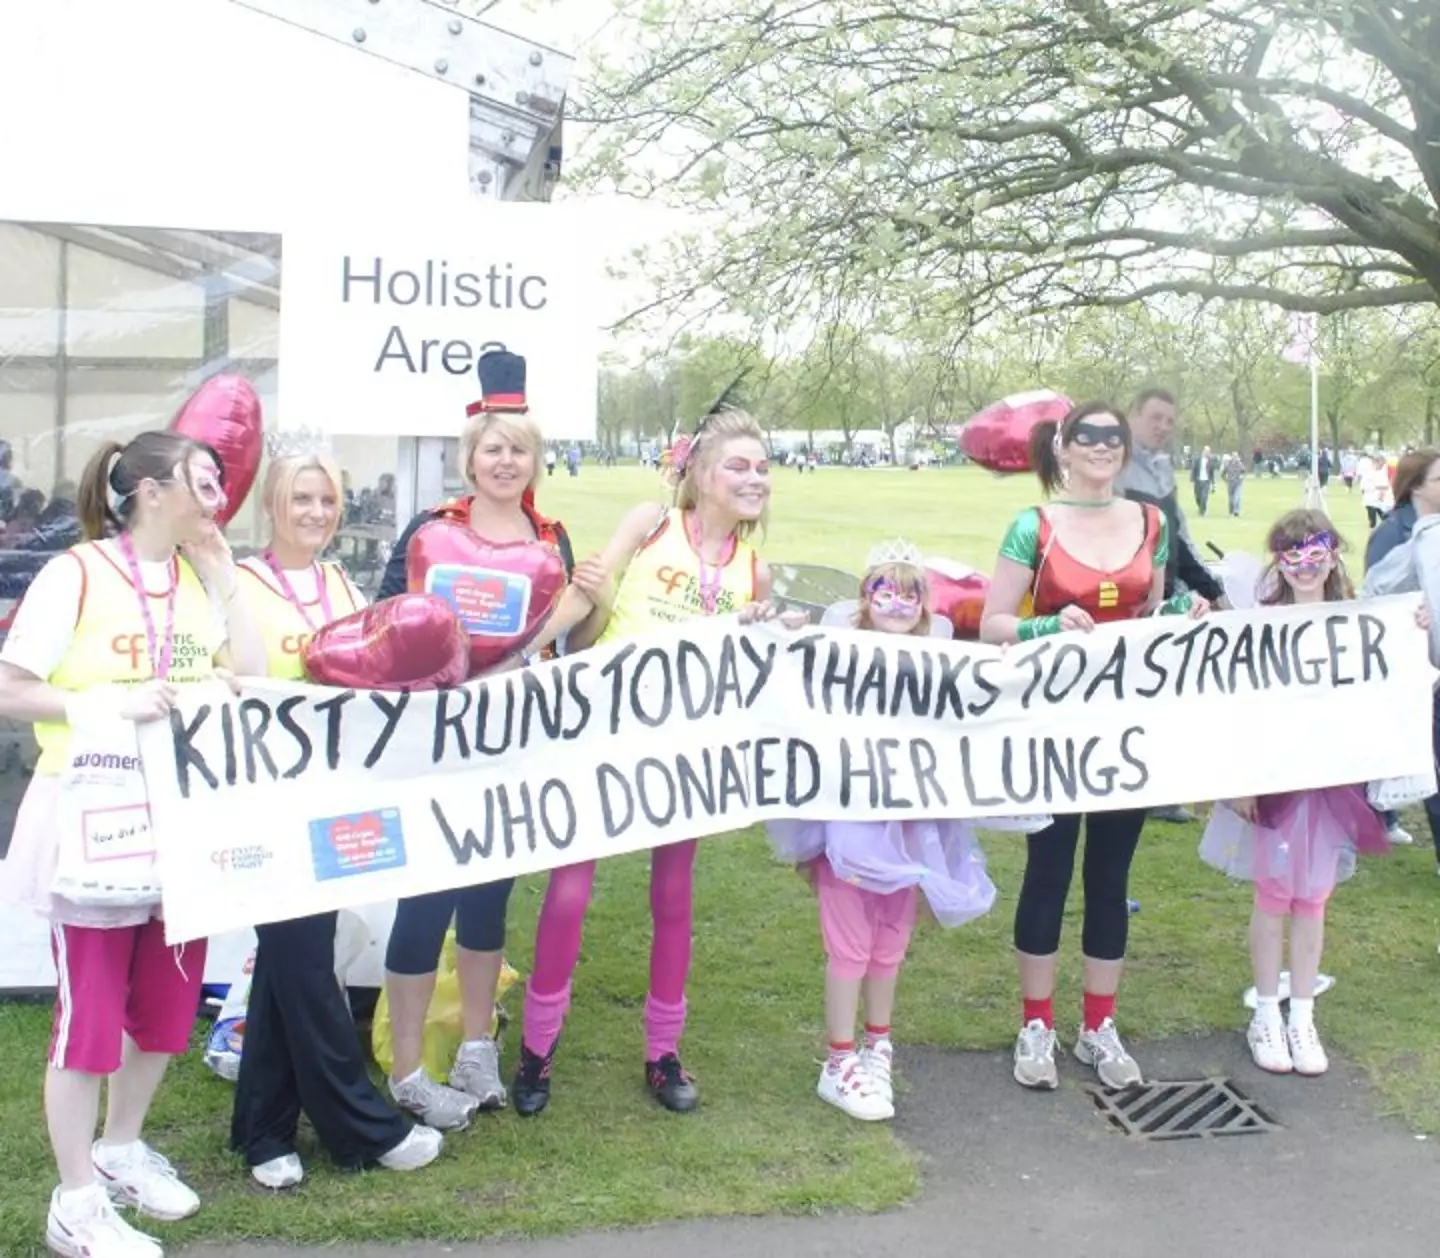 Kirsty ran a 10k after she had her lung transplant (